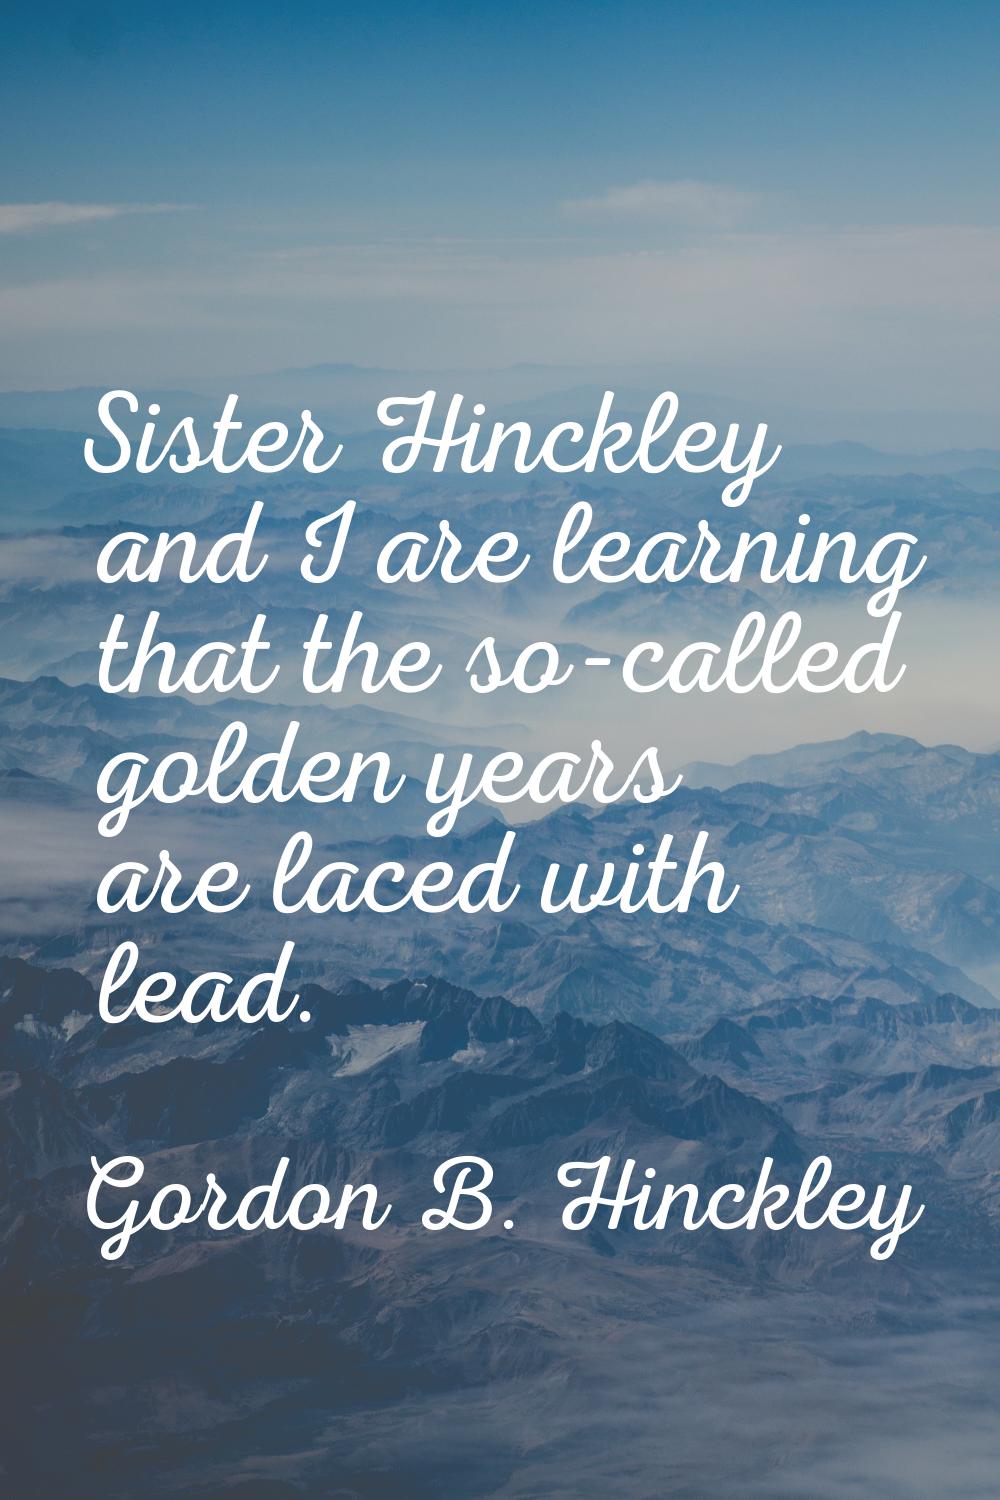 Sister Hinckley and I are learning that the so-called golden years are laced with lead.